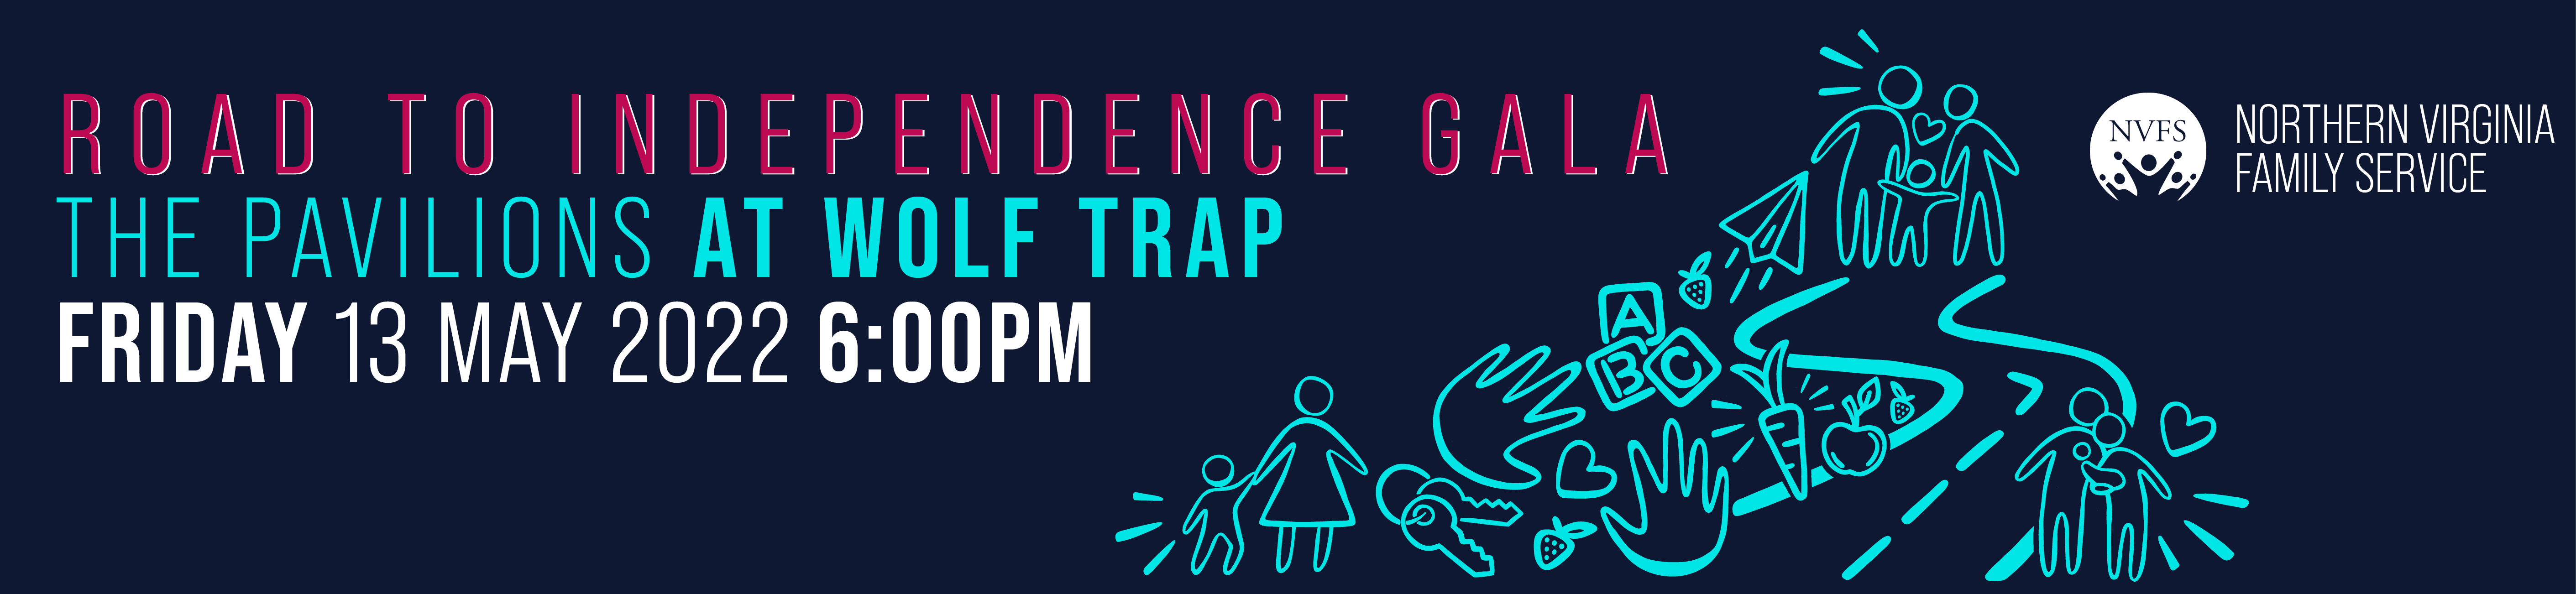 Road to Independence Gala The Pavilions at Wolf Trap Friday 13 May 2022 6 pm